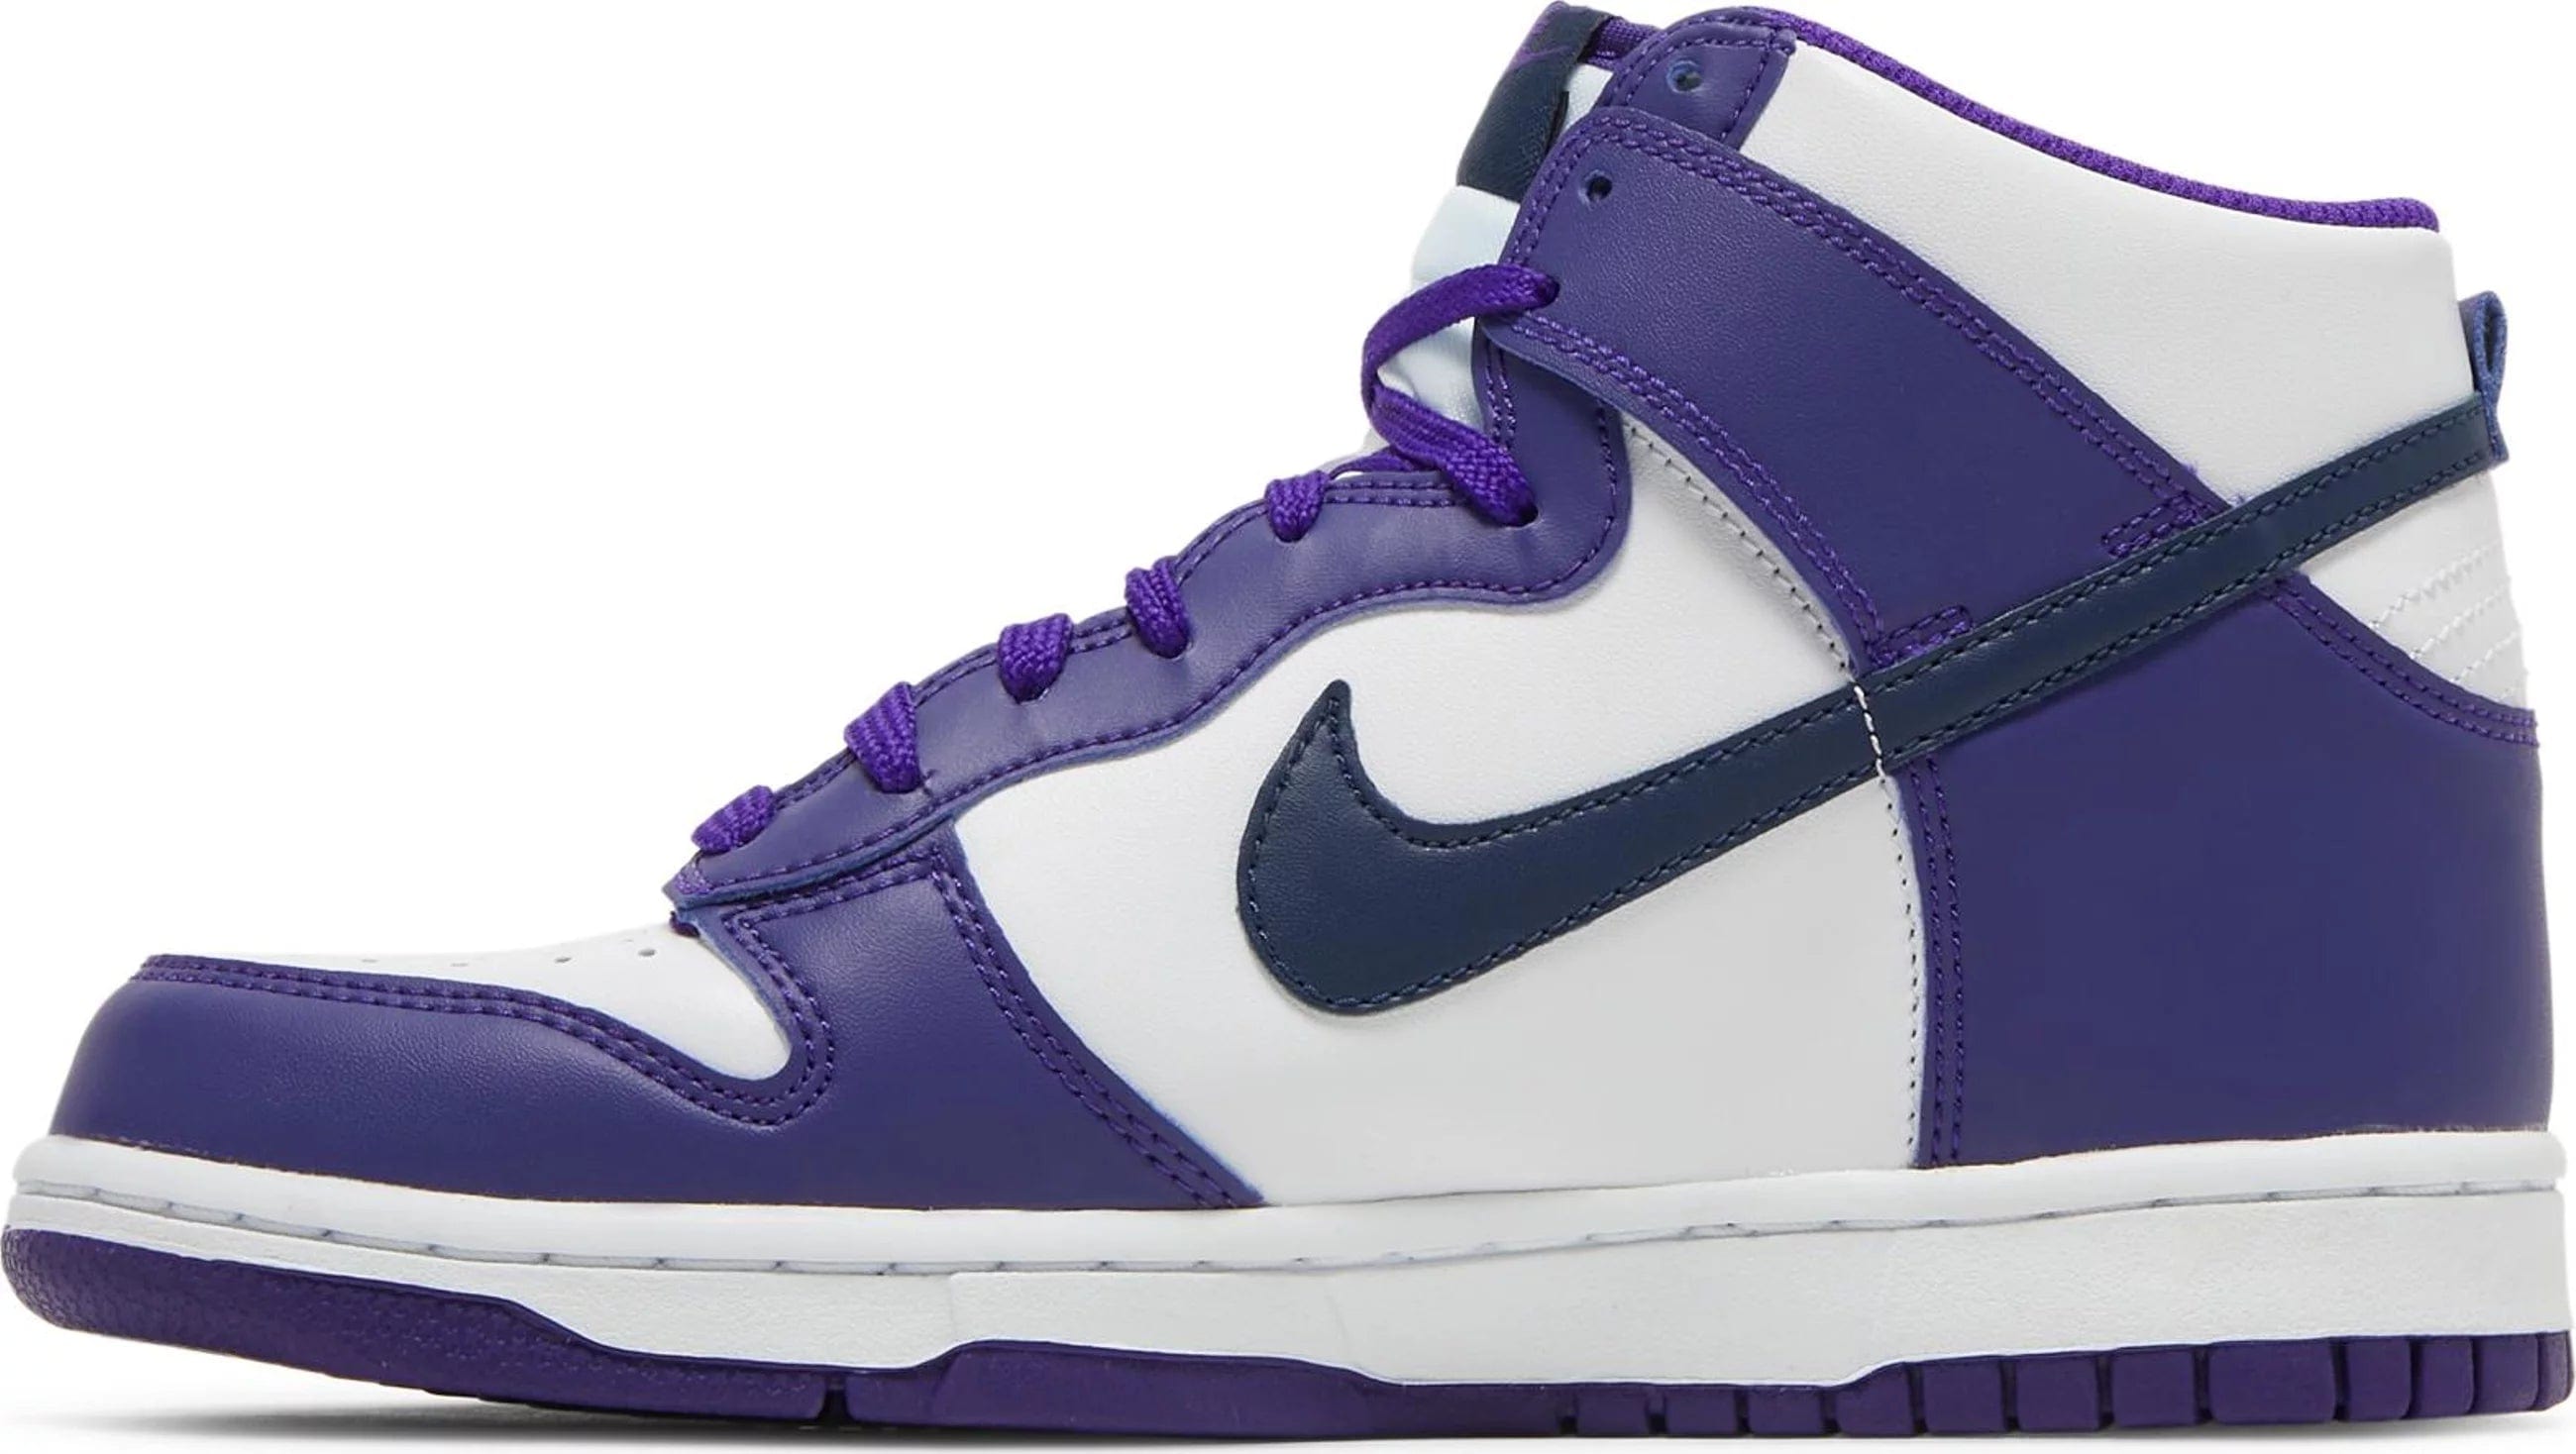 sneakers Nike Dunk High Electro Purple Midnght Navy (GS) Women's